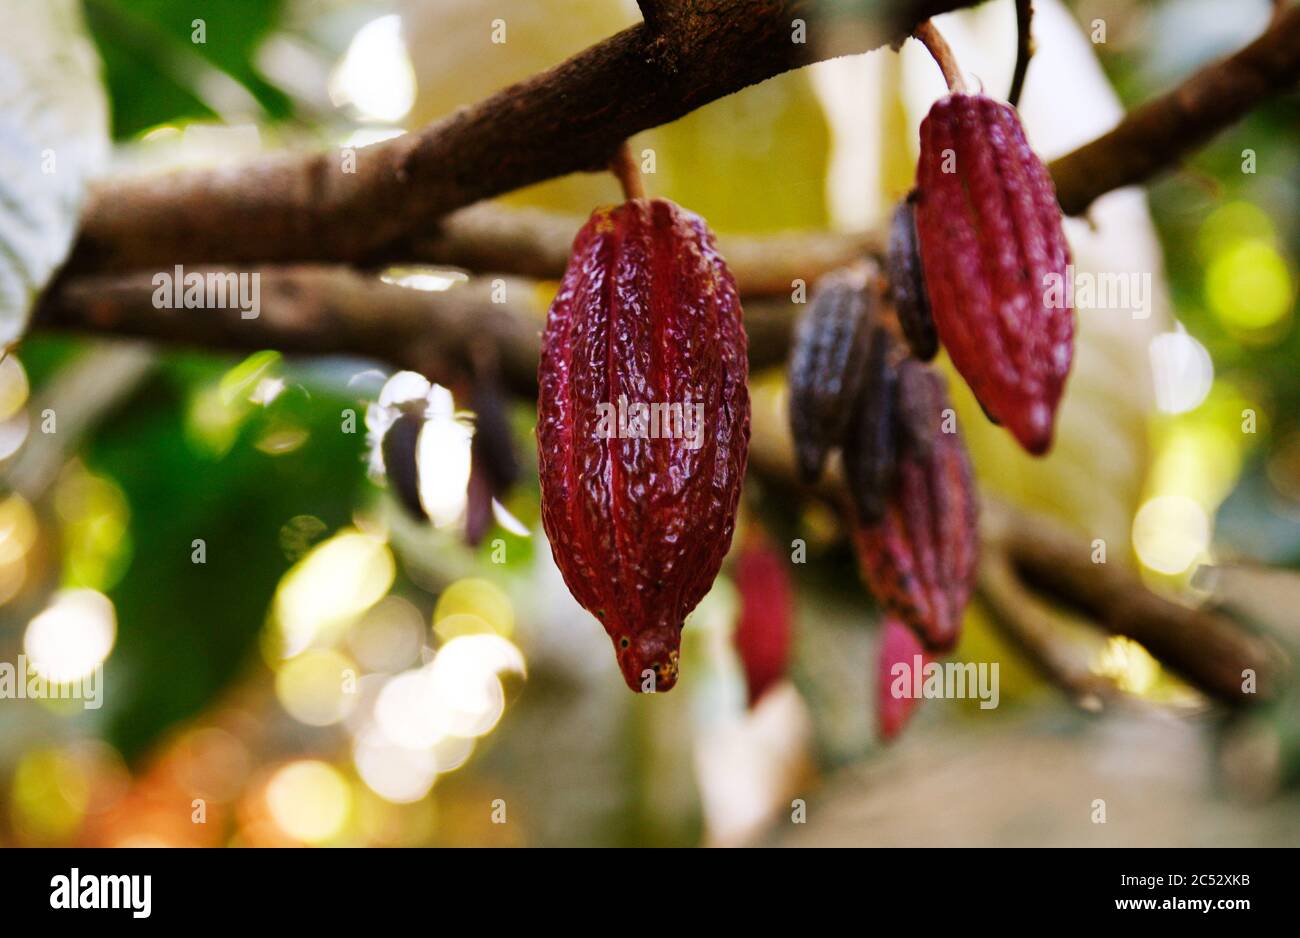 chocolate, cocoapods, cocoa, cocoa bean, cacao, beans, agriculture, farm, colombia, south america, minca, fruit, red, plant, nature, green, food, gard Stock Photo